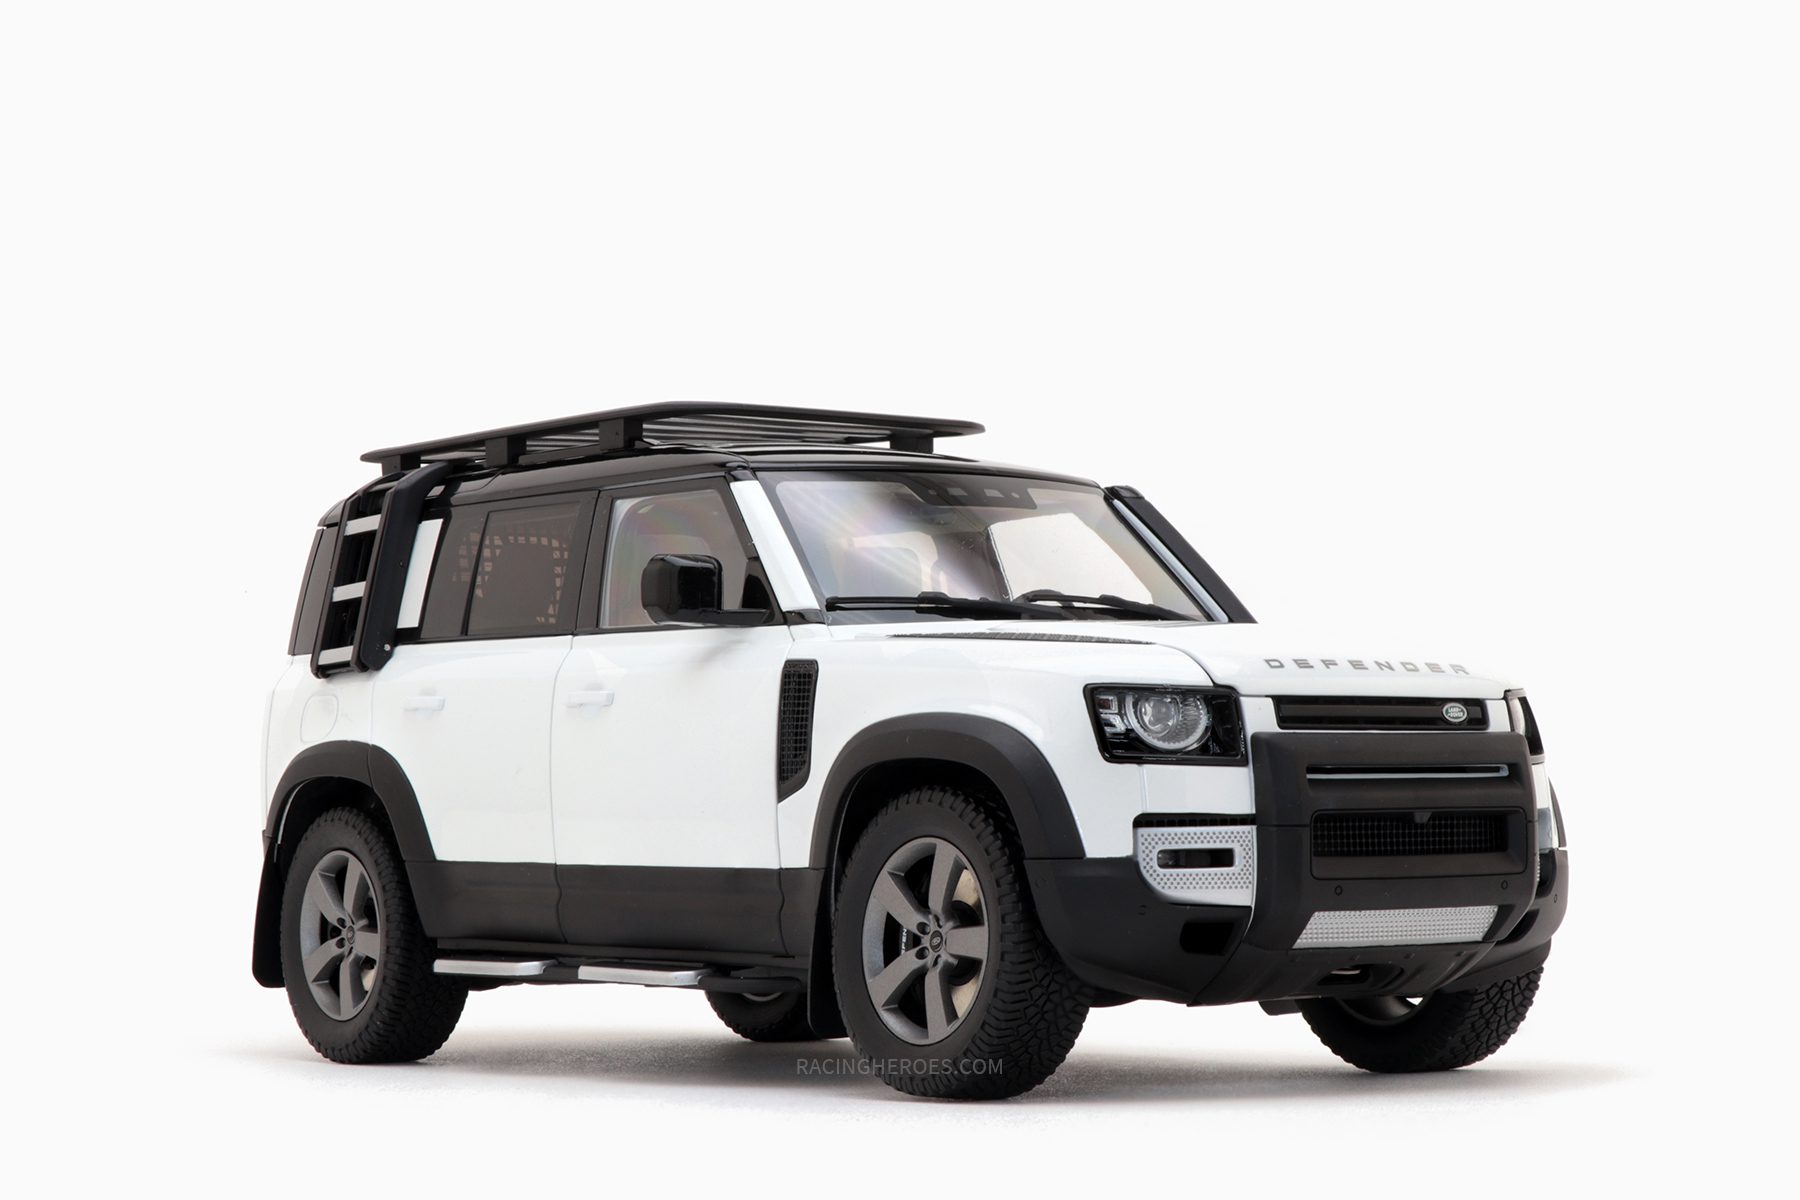 Land Rover Defender 110 with Roof Pack - 2020 - Fuji White Almost Real 1:18